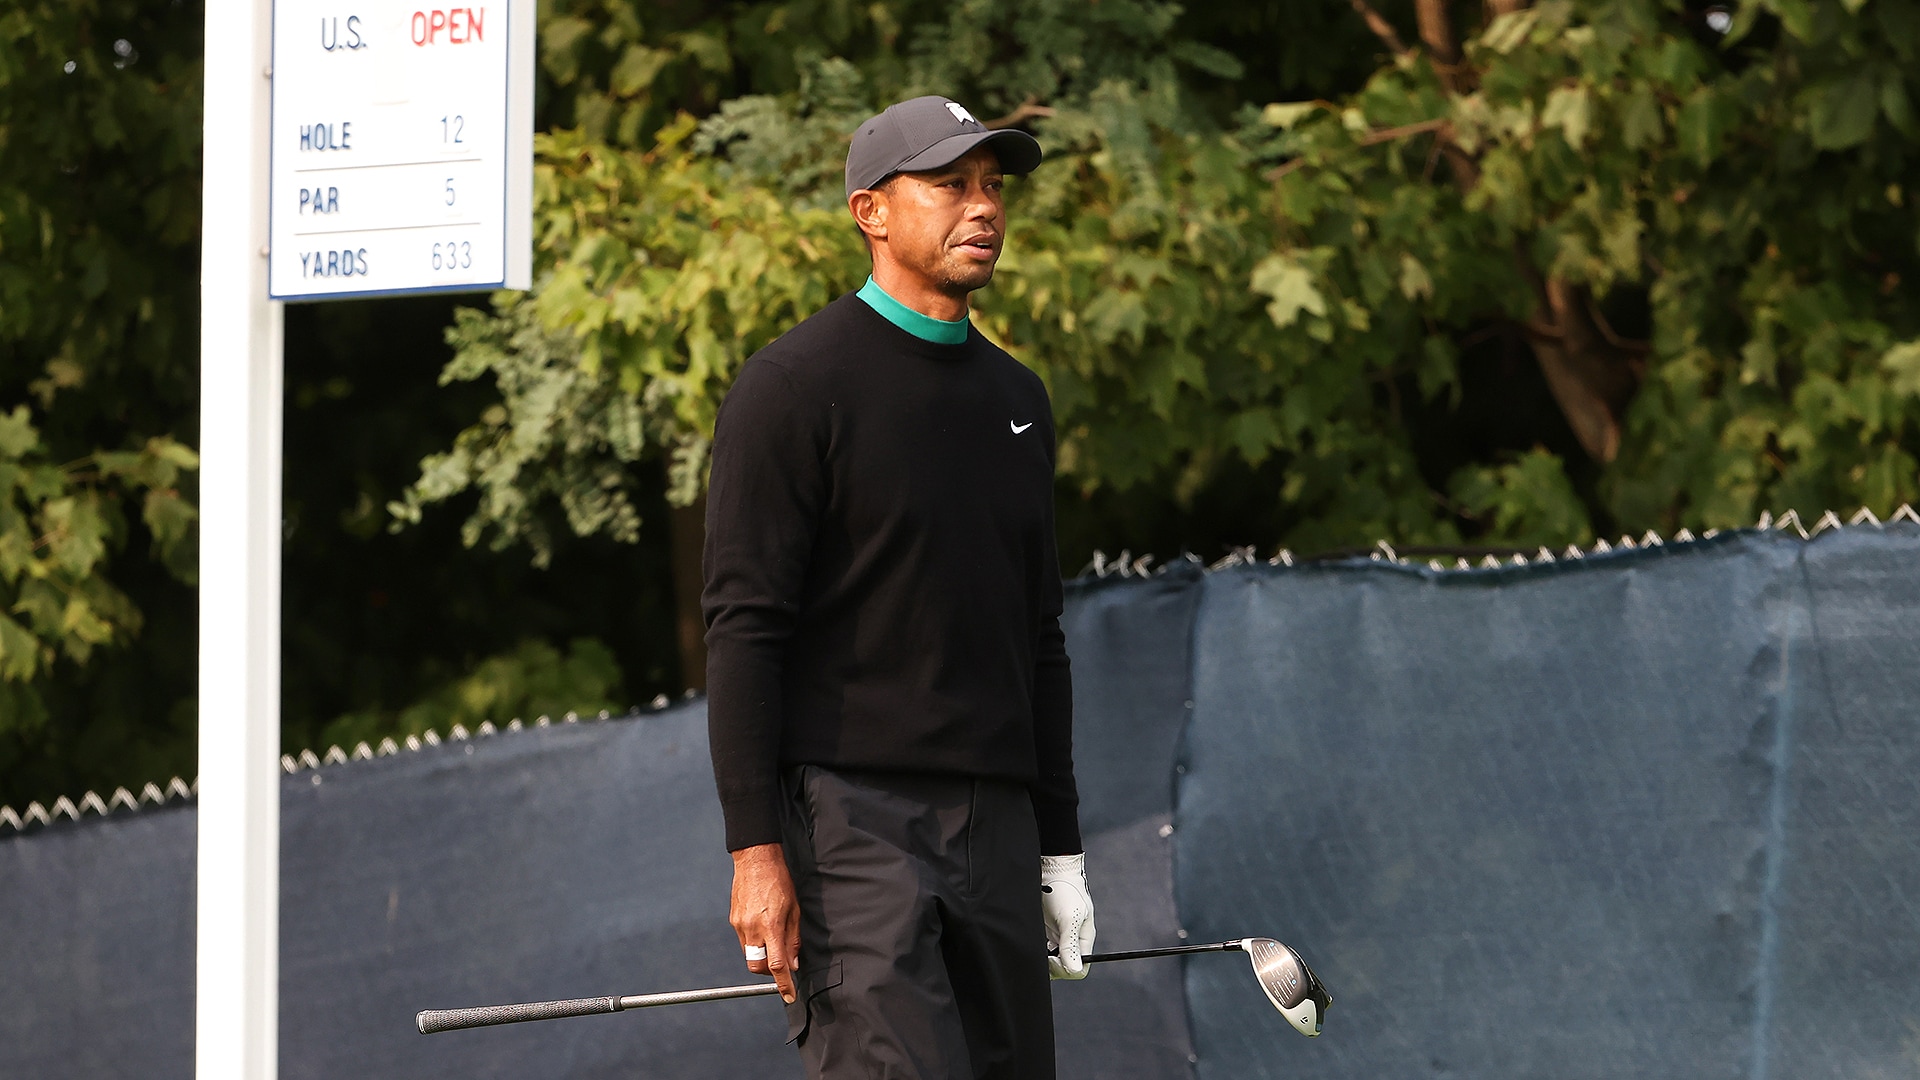 Where's Tiger Woods rank Winged Foot difficulty? 'Either 1 or 2' 4